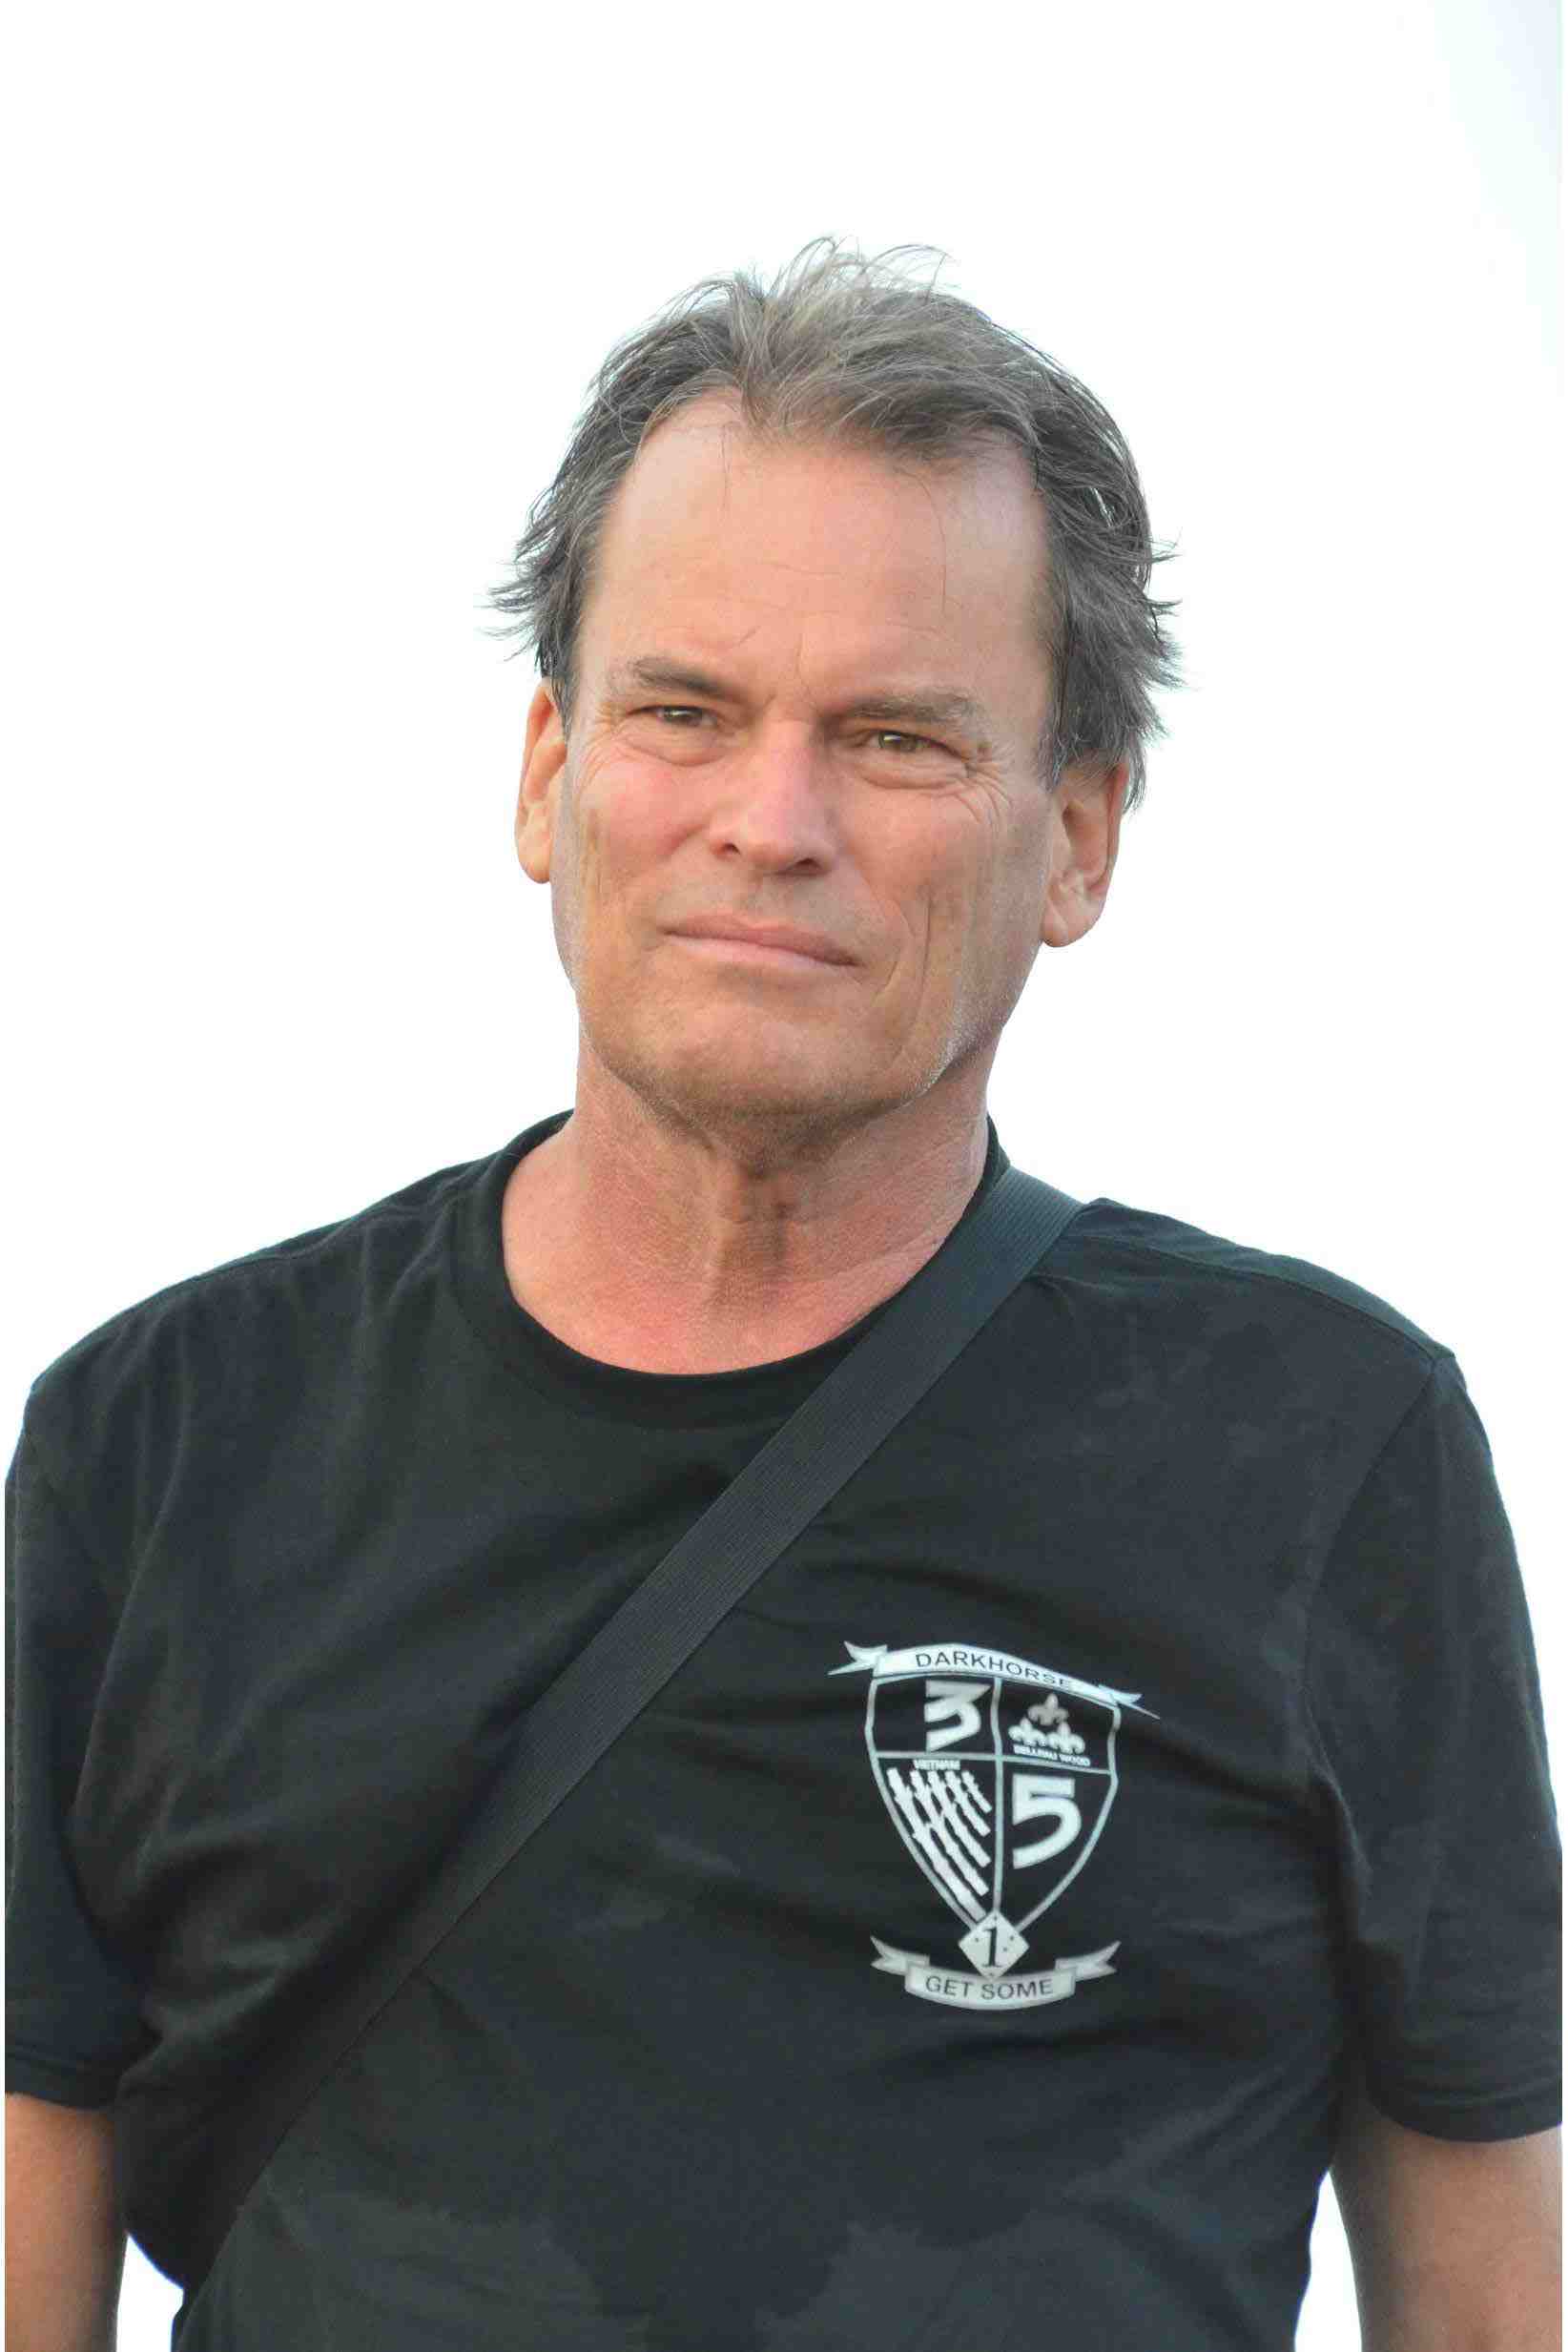 A photograph of a person with mid-length gray hair, a somewhat grim expression, and a black T-shirt with a small shield design in the top left.